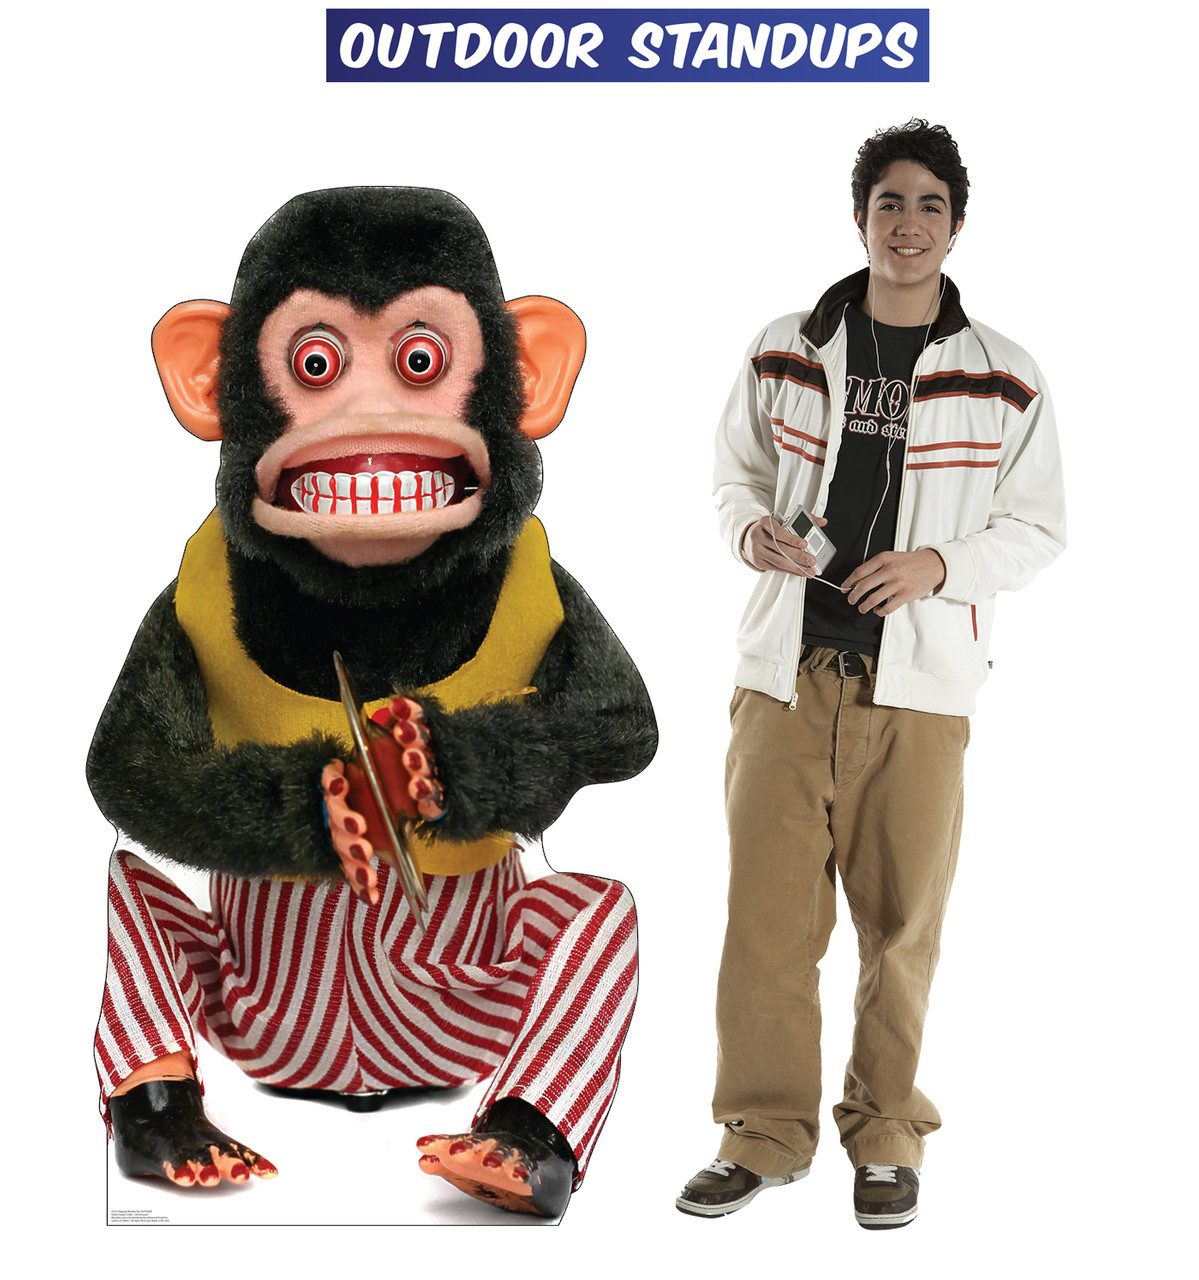 Clapping Monkey Outdoor Standee with model.